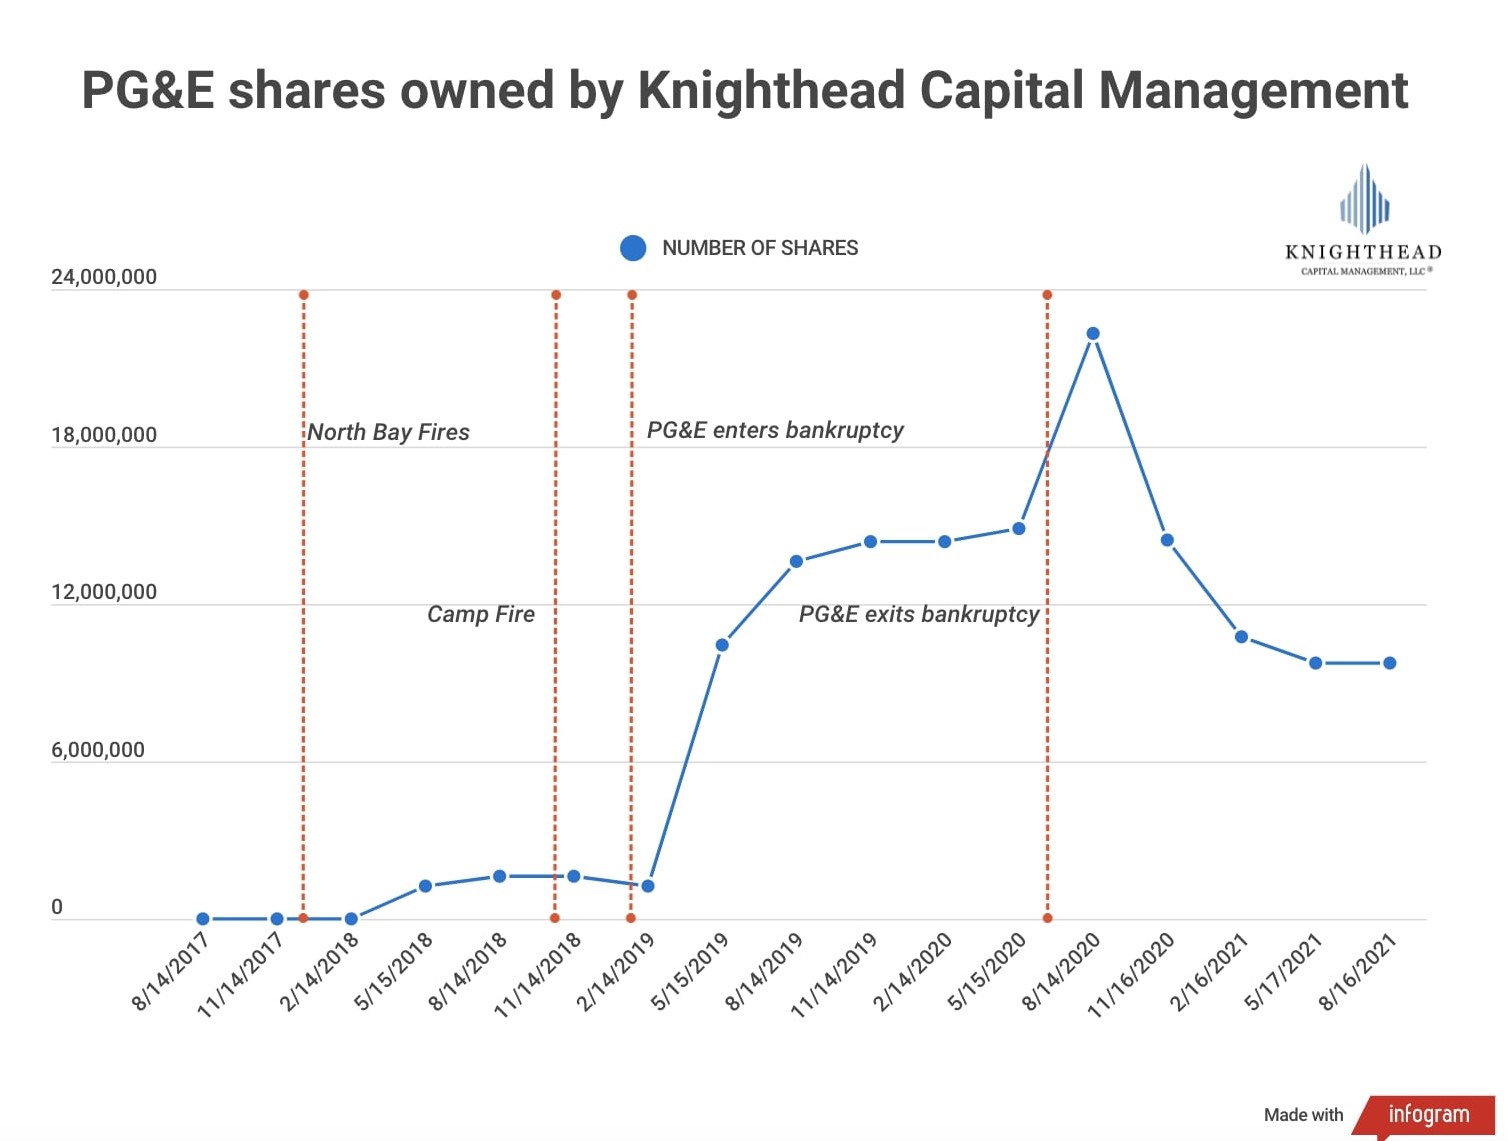 A graphic shows PG&E shares owned by Knighthead Capital Management from 2017 to 2021, with shares peaking after PG&E exits bankruptcy, particularly in August 2020.